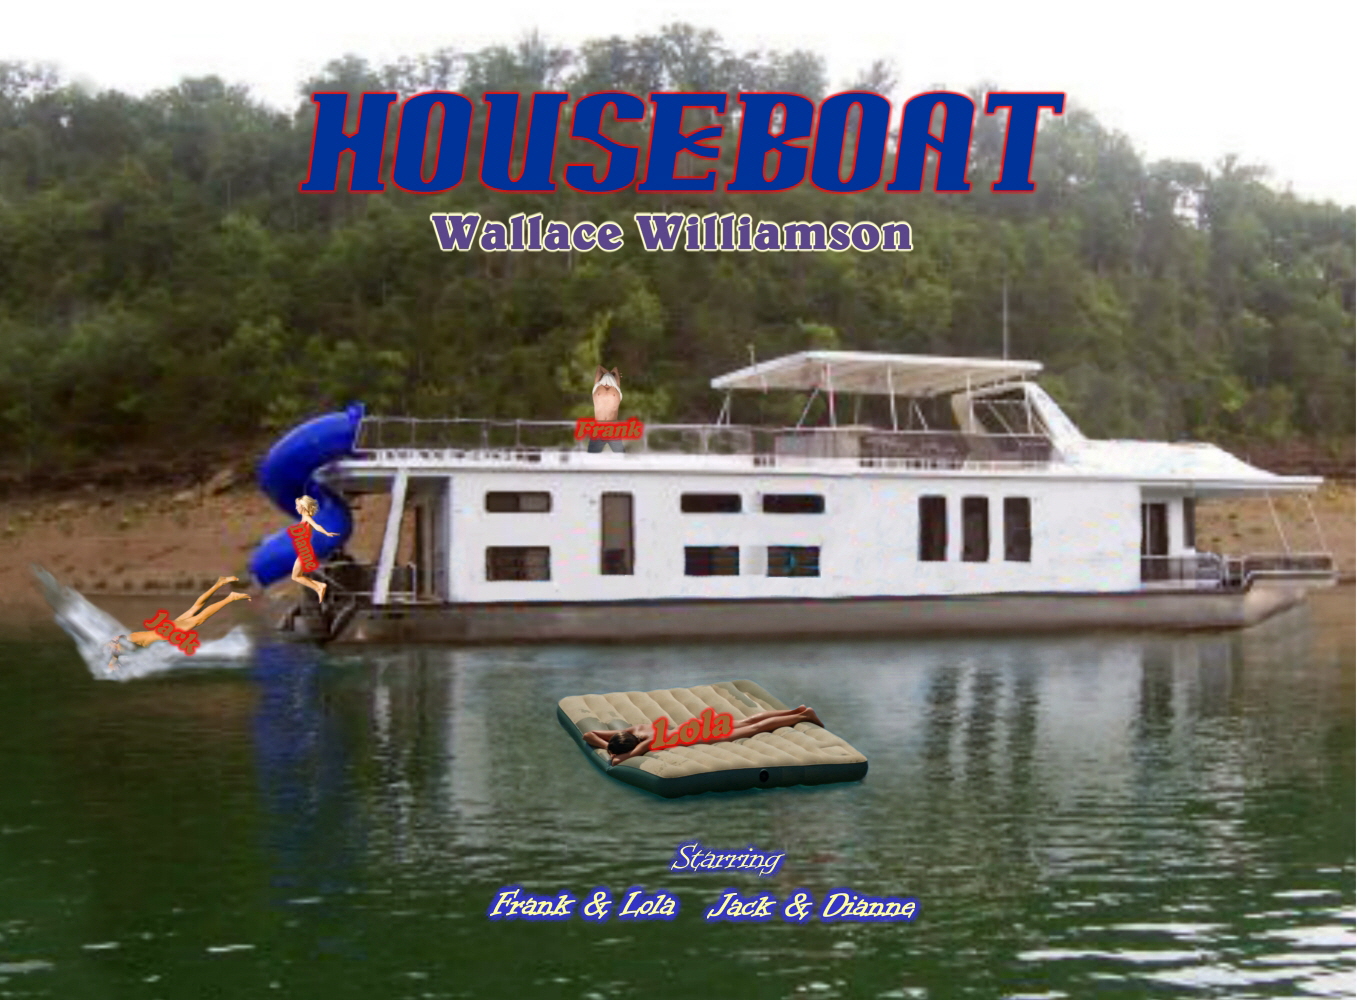 Here's A Big Pic Of The Cover 4 HouseBoat!  Click The Pic 4 A Better View!!!